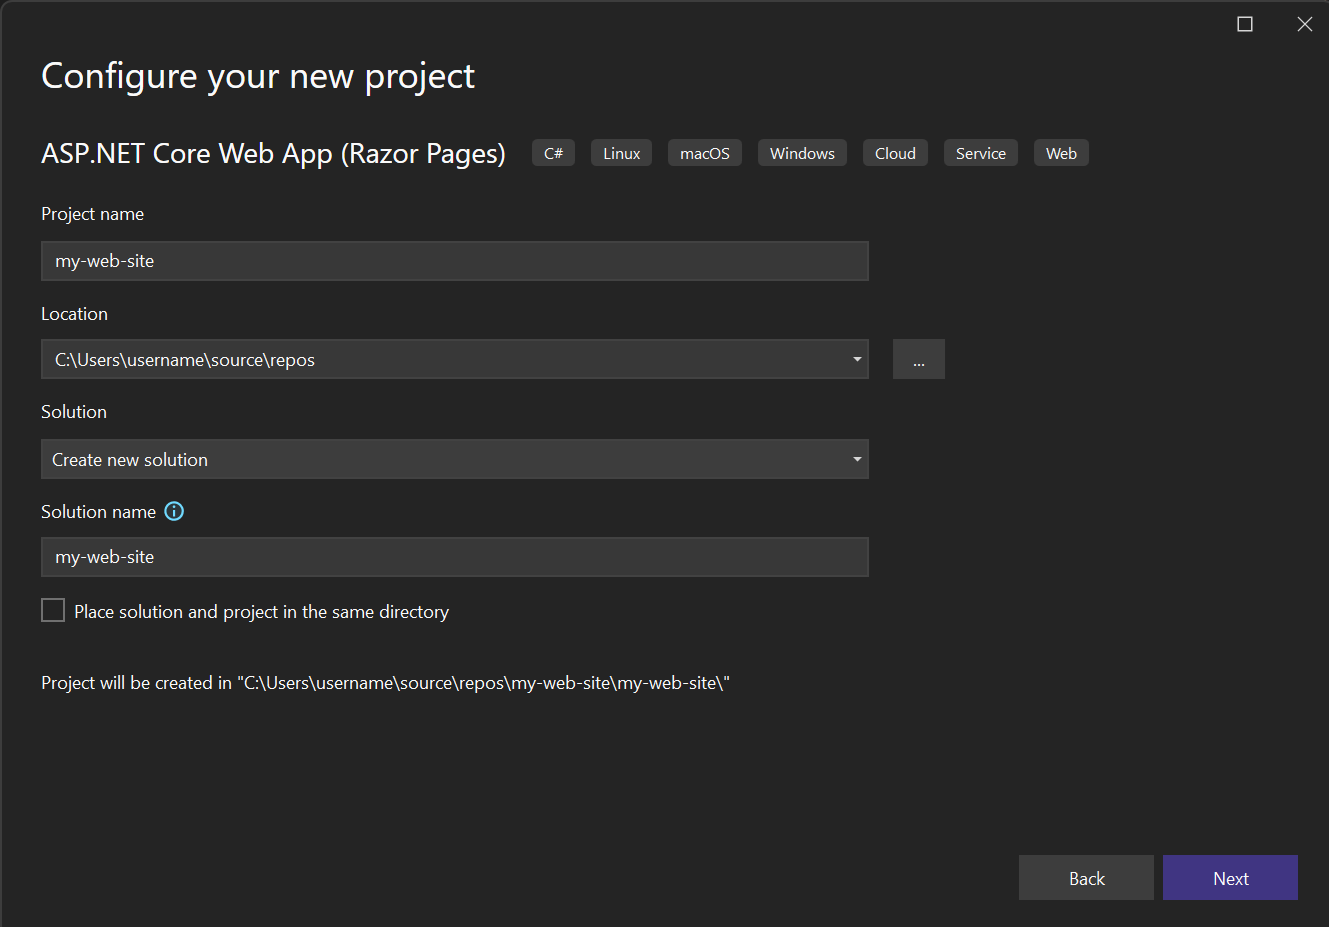 Screenshot showing the Configure your new project dialog in Visual Studio 2022 and the options to set, including the project name and project location.